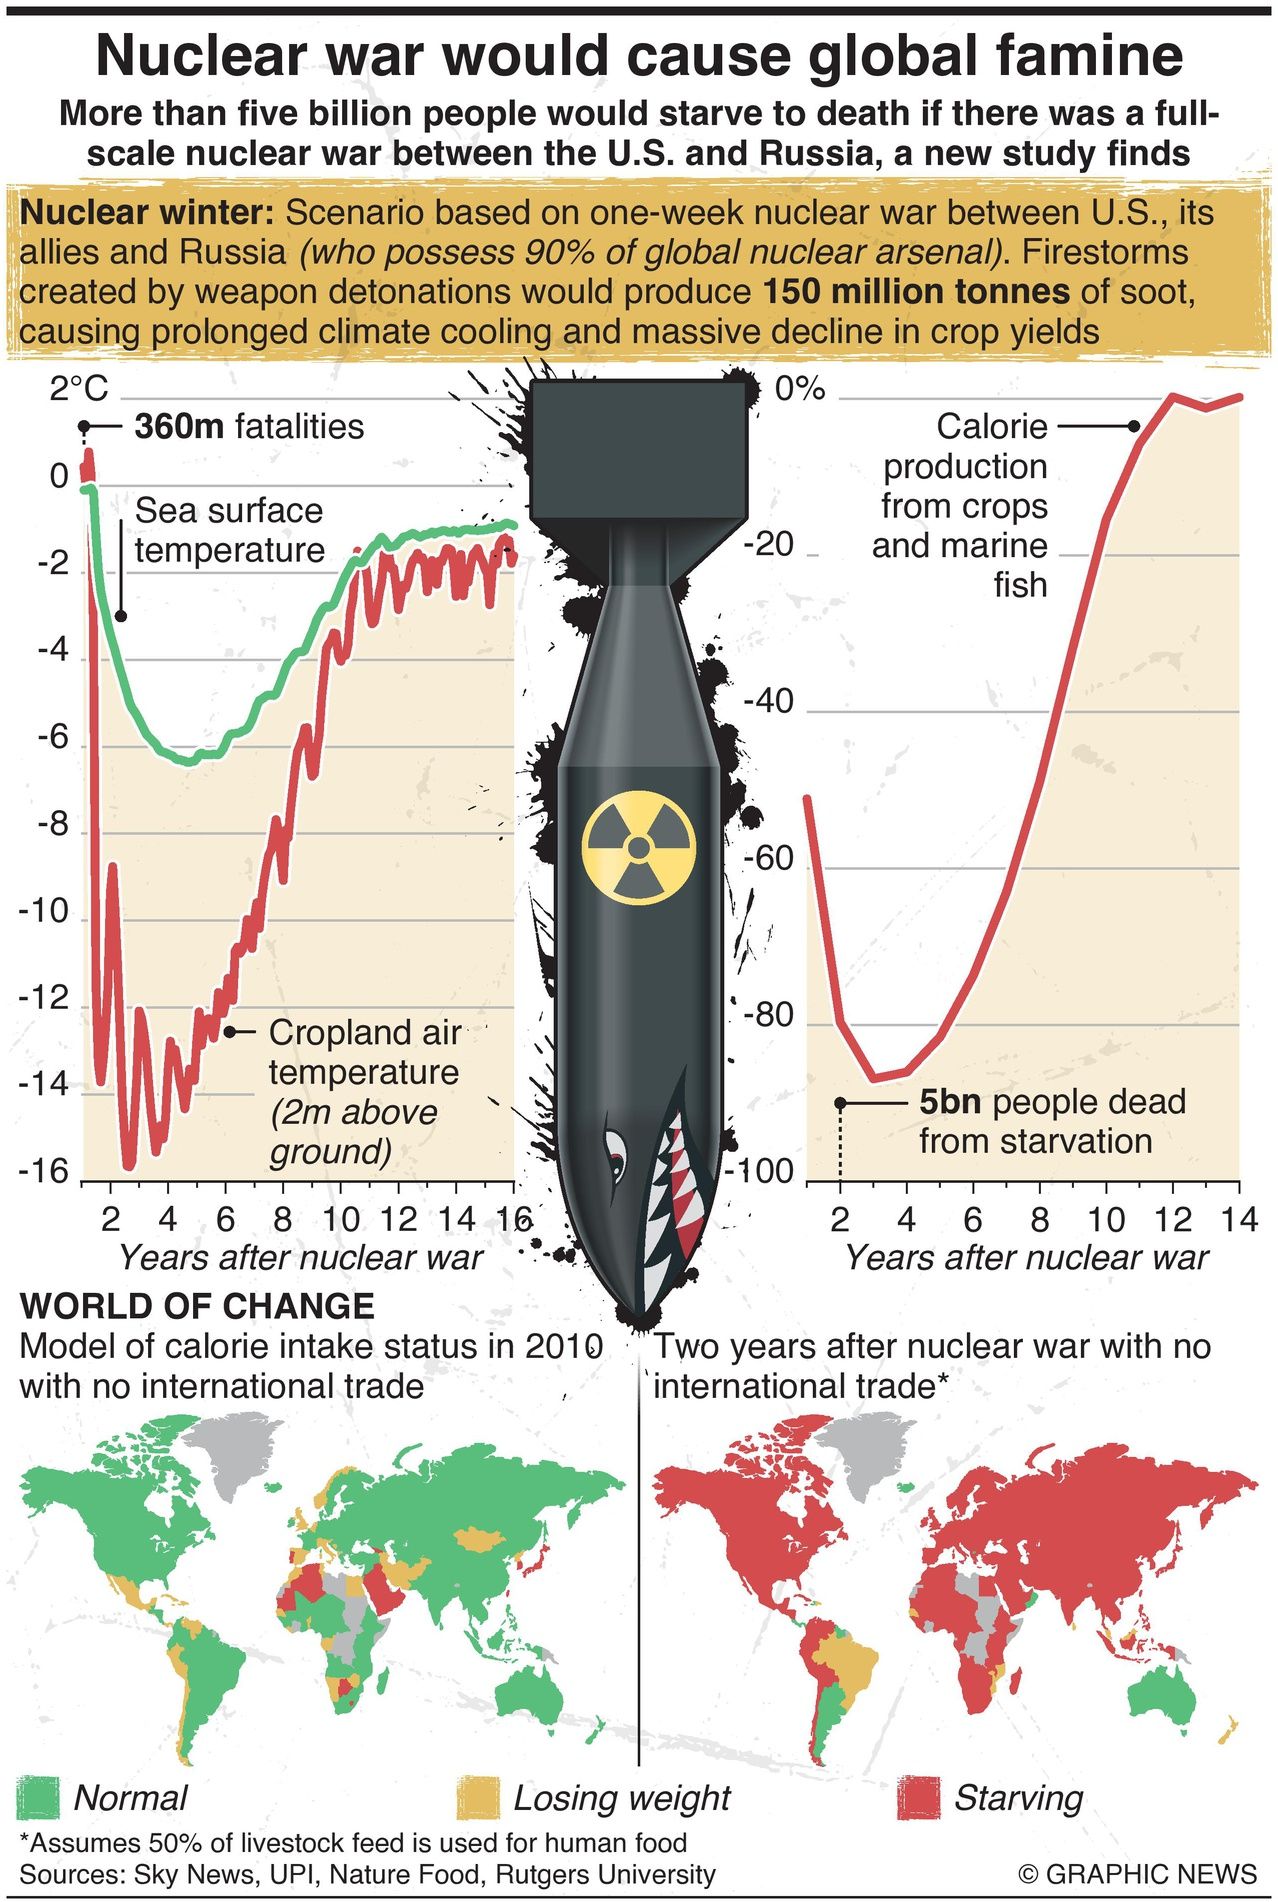 Rutgers University study on starvation due to nuclear warfare infographic